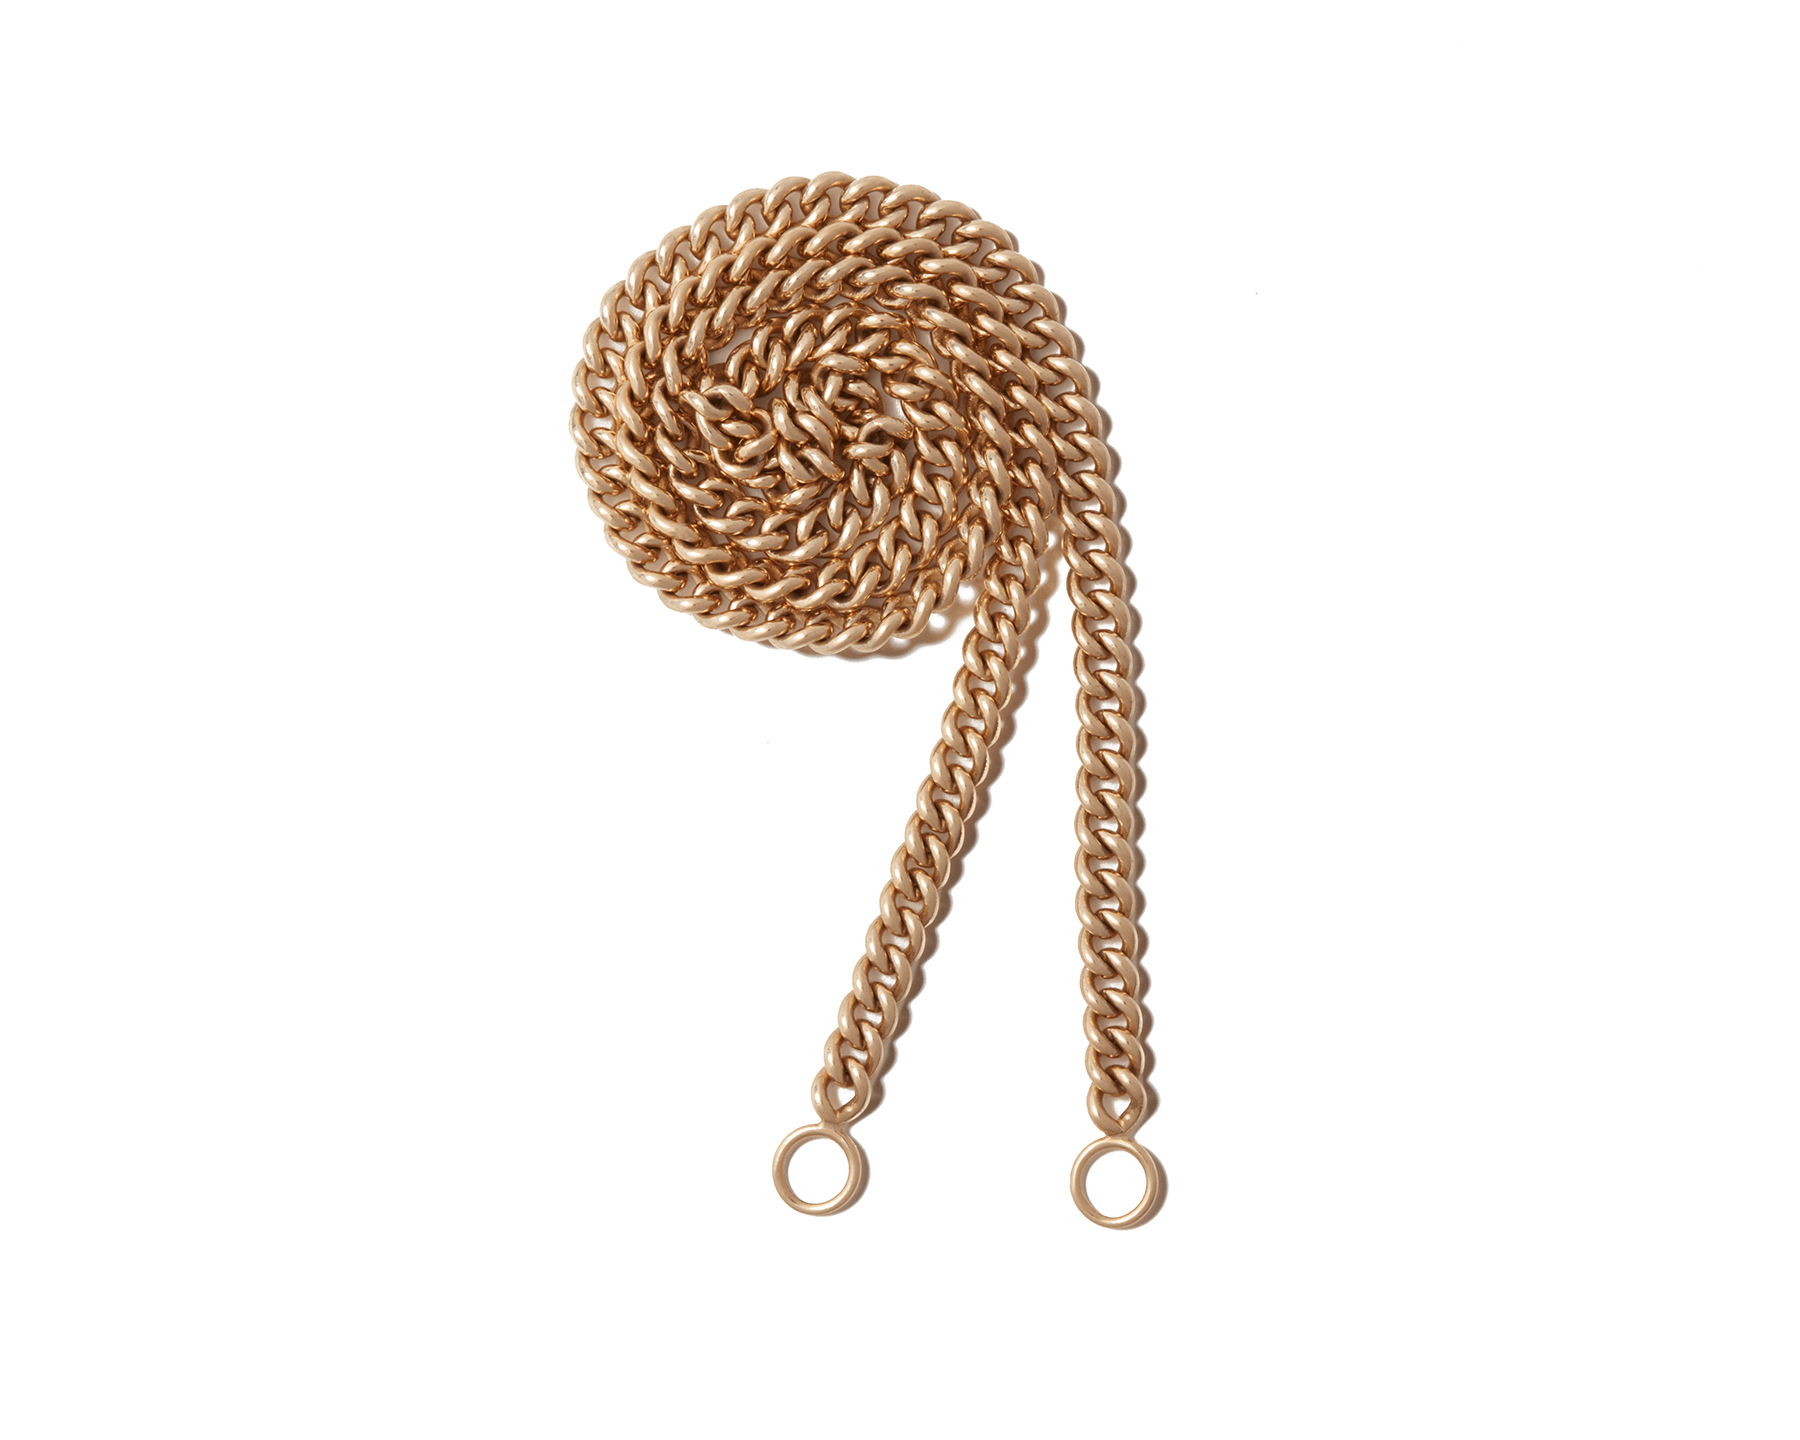 Curled up gold Marla Aaron heavy curb chain